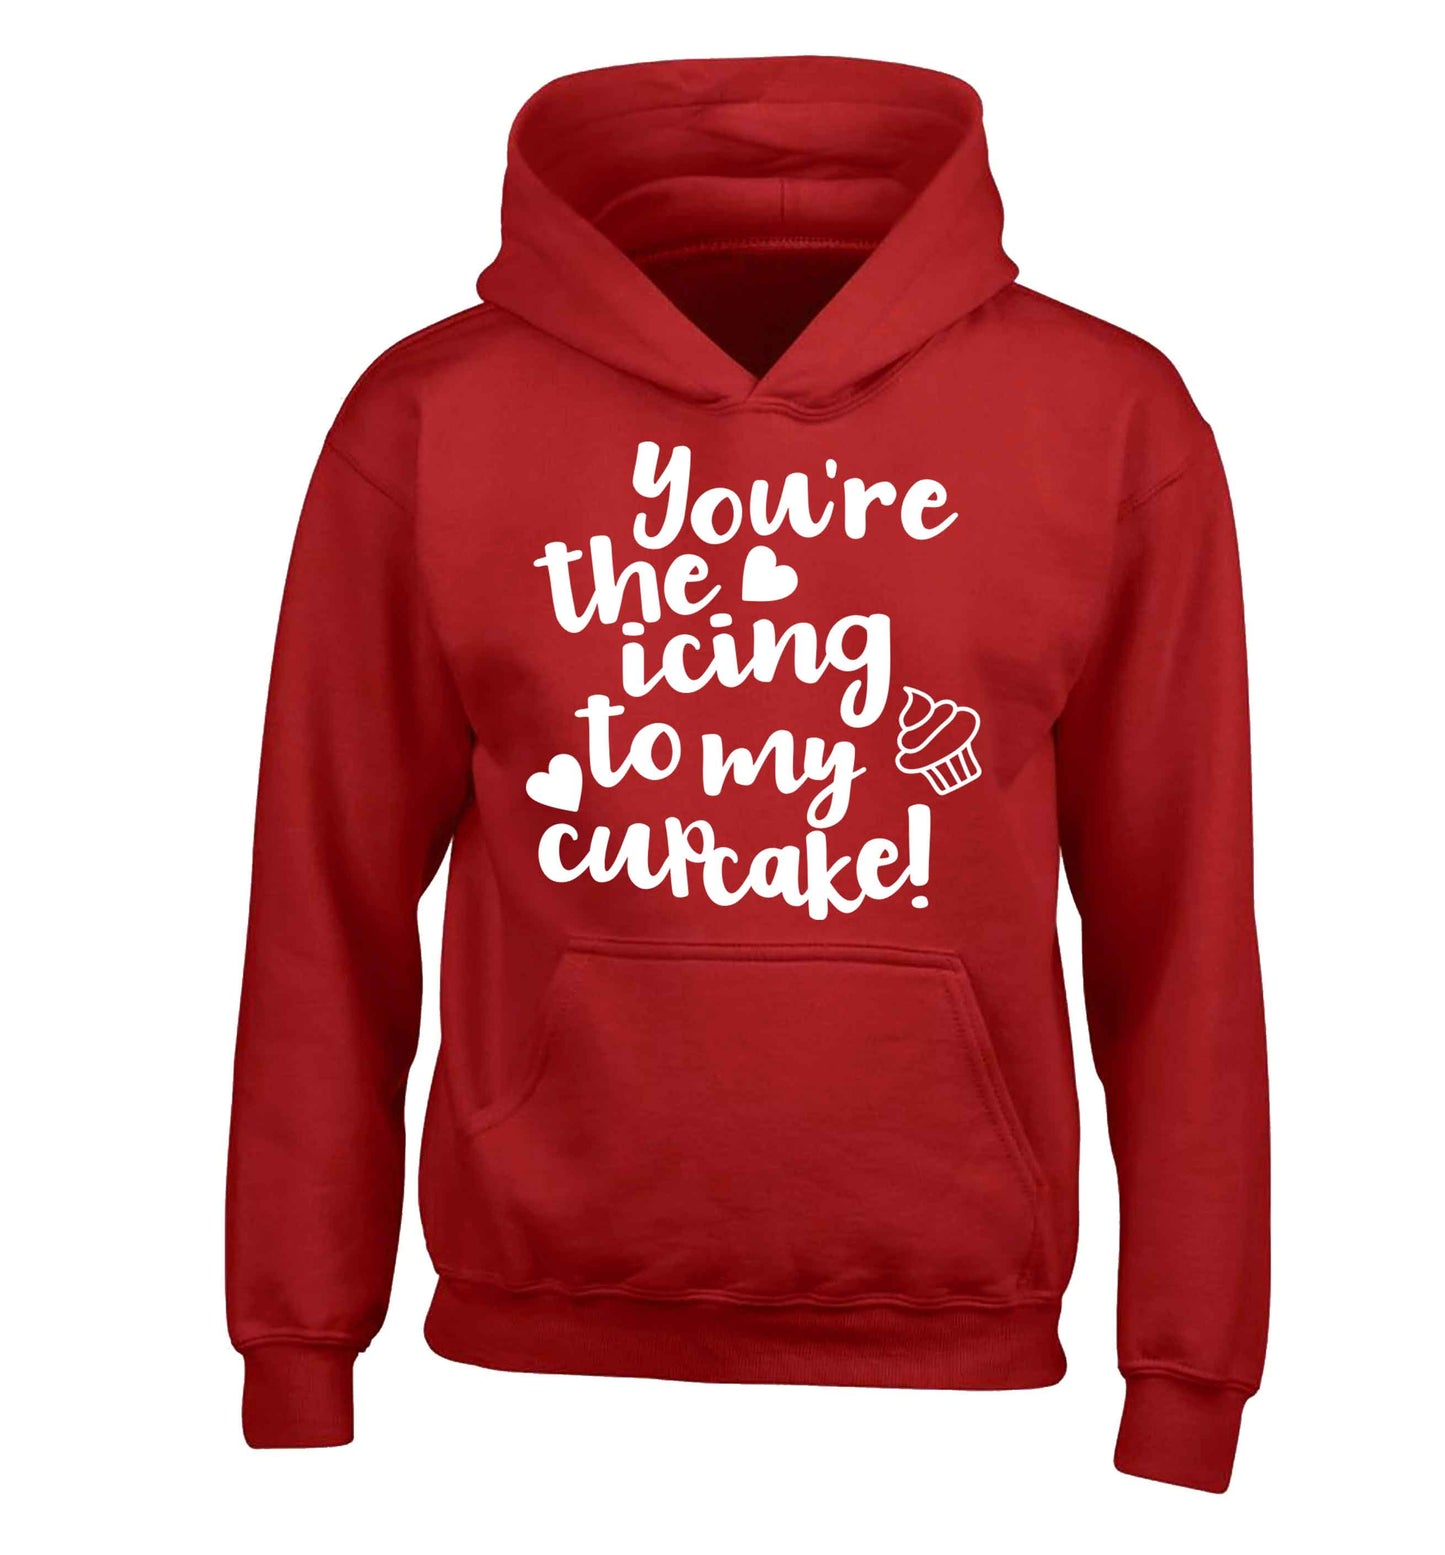 You're the icing to my cupcake children's red hoodie 12-13 Years